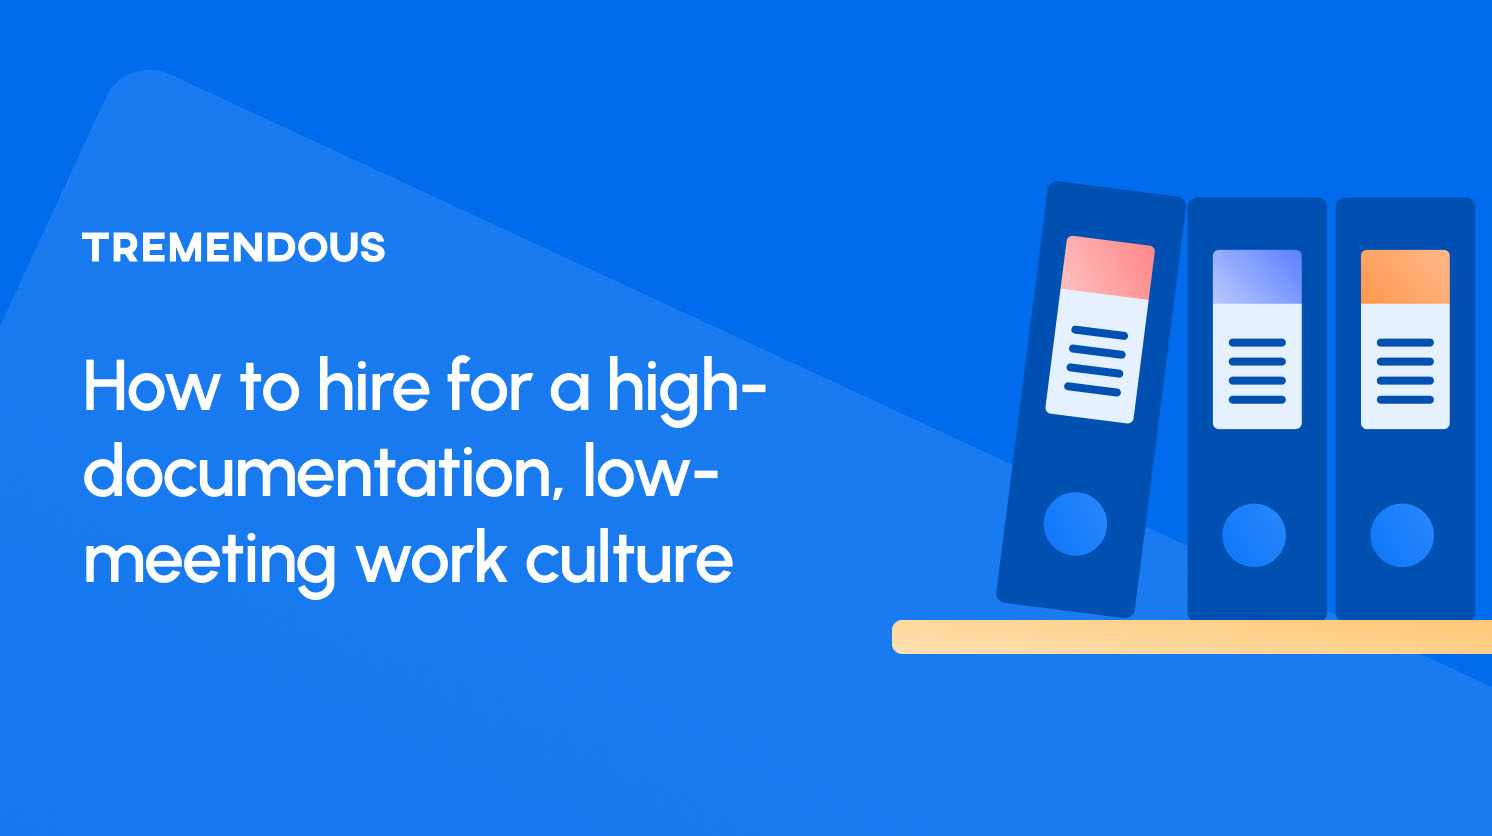 How to hire for a high-documentation, low-meeting work culture